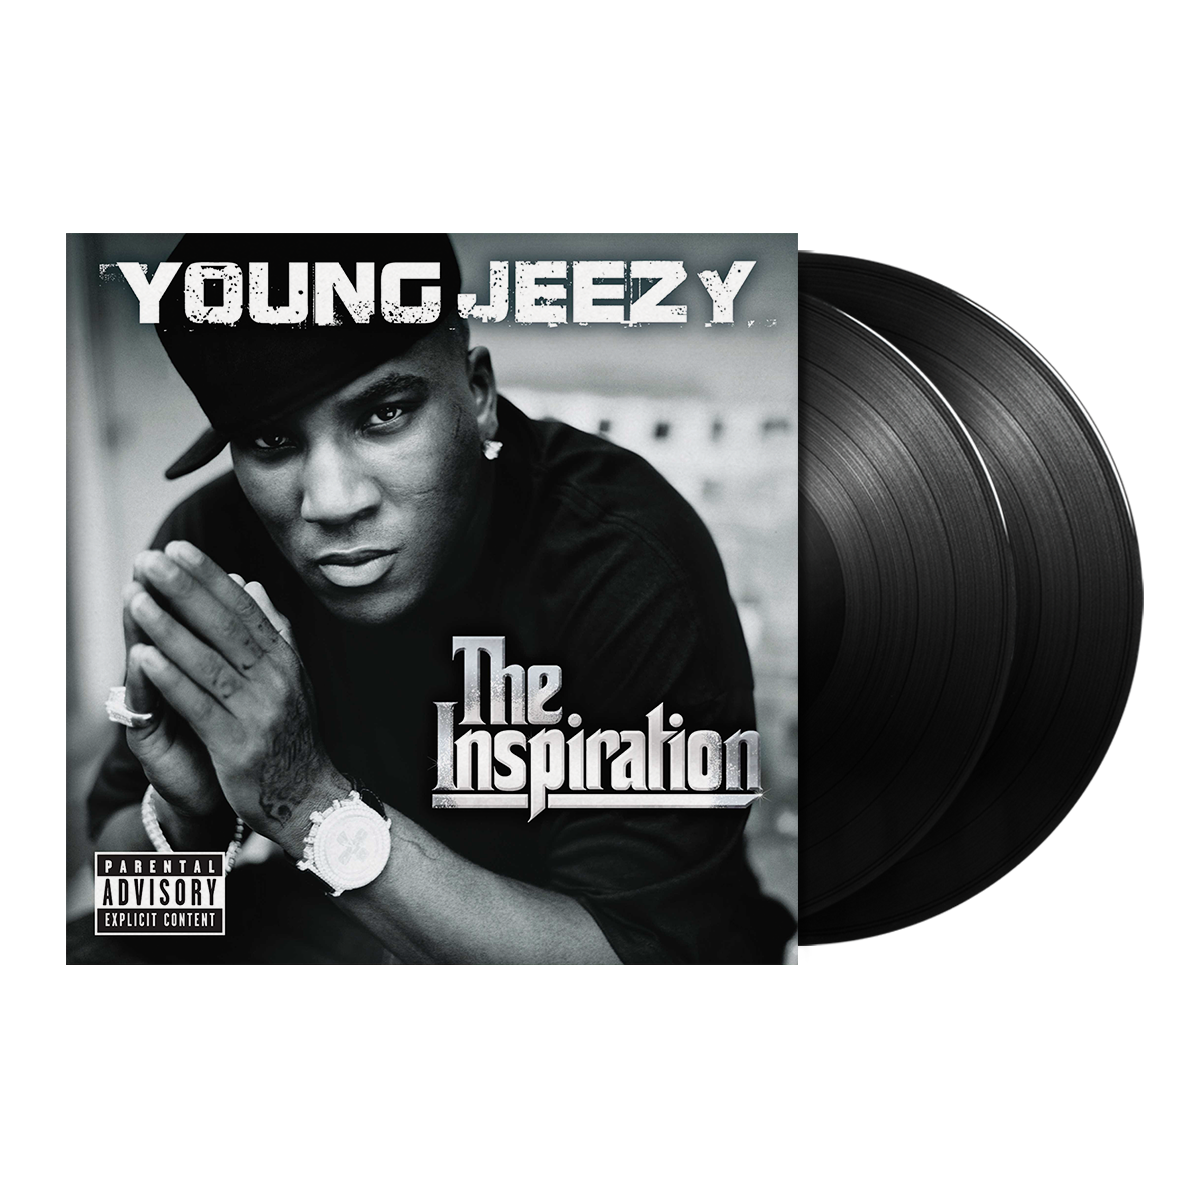 name of the new young jeezy album